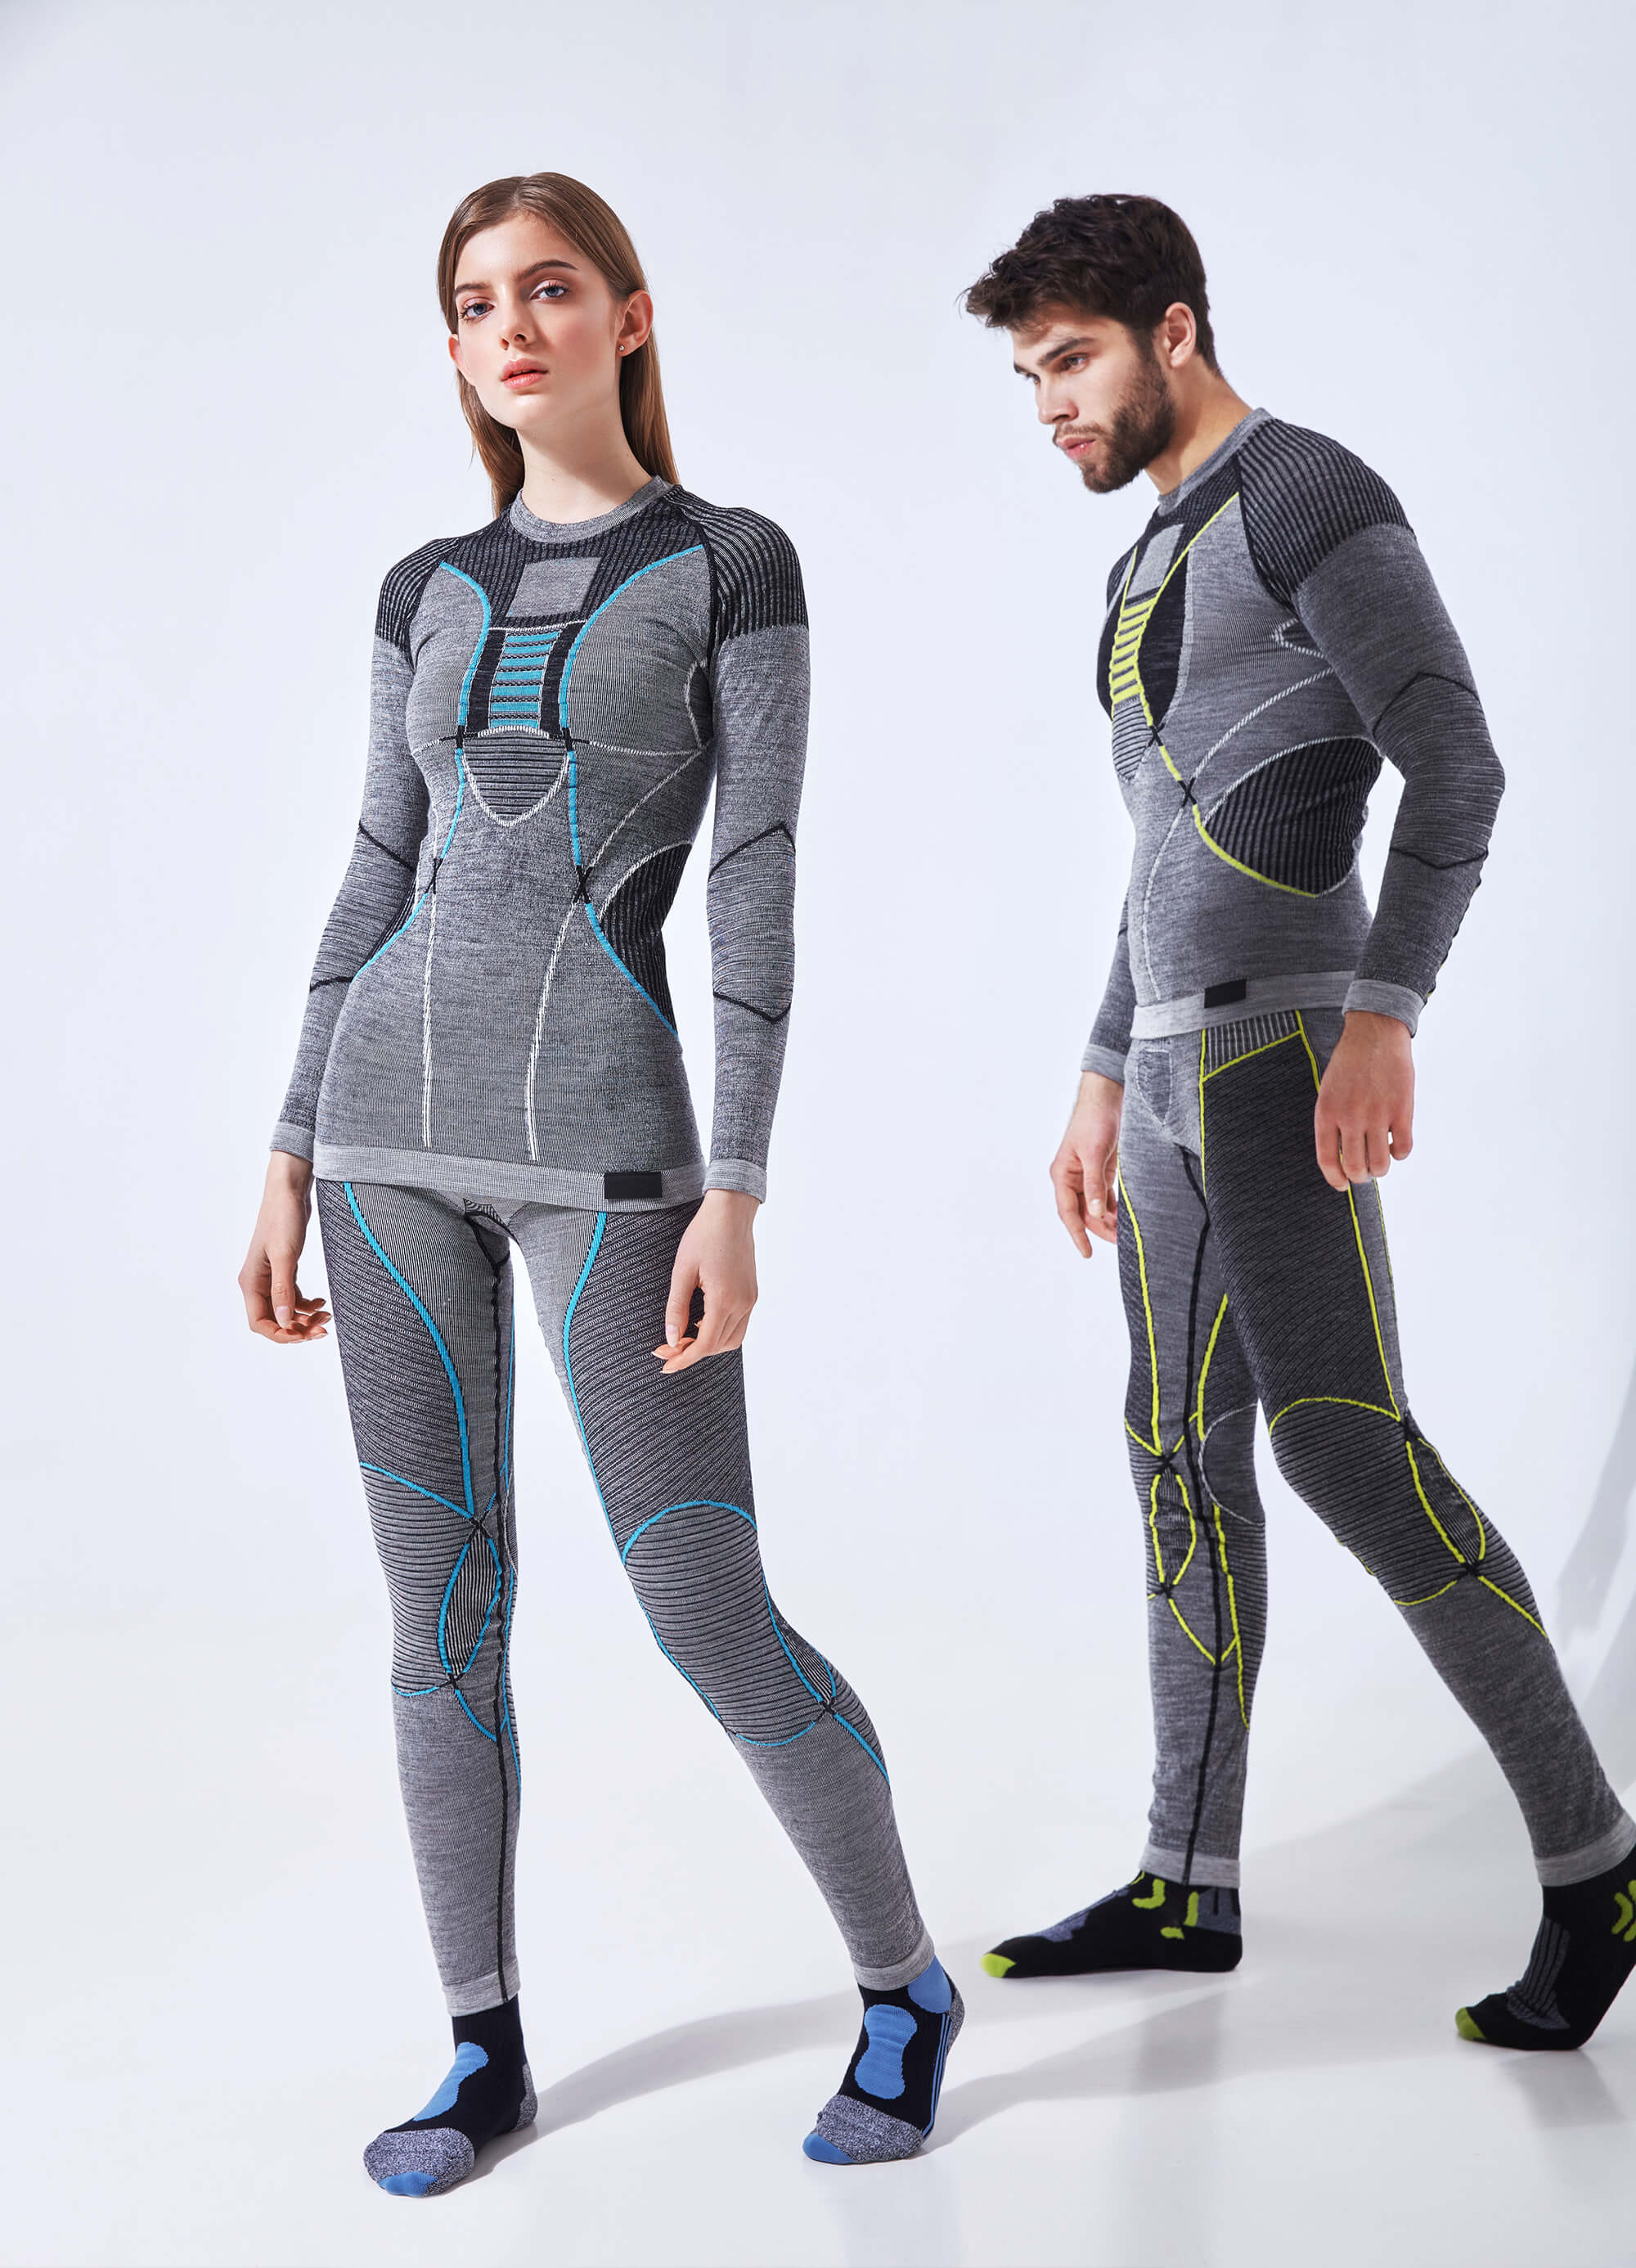 A man and a woman wearing thermal underwear and socks